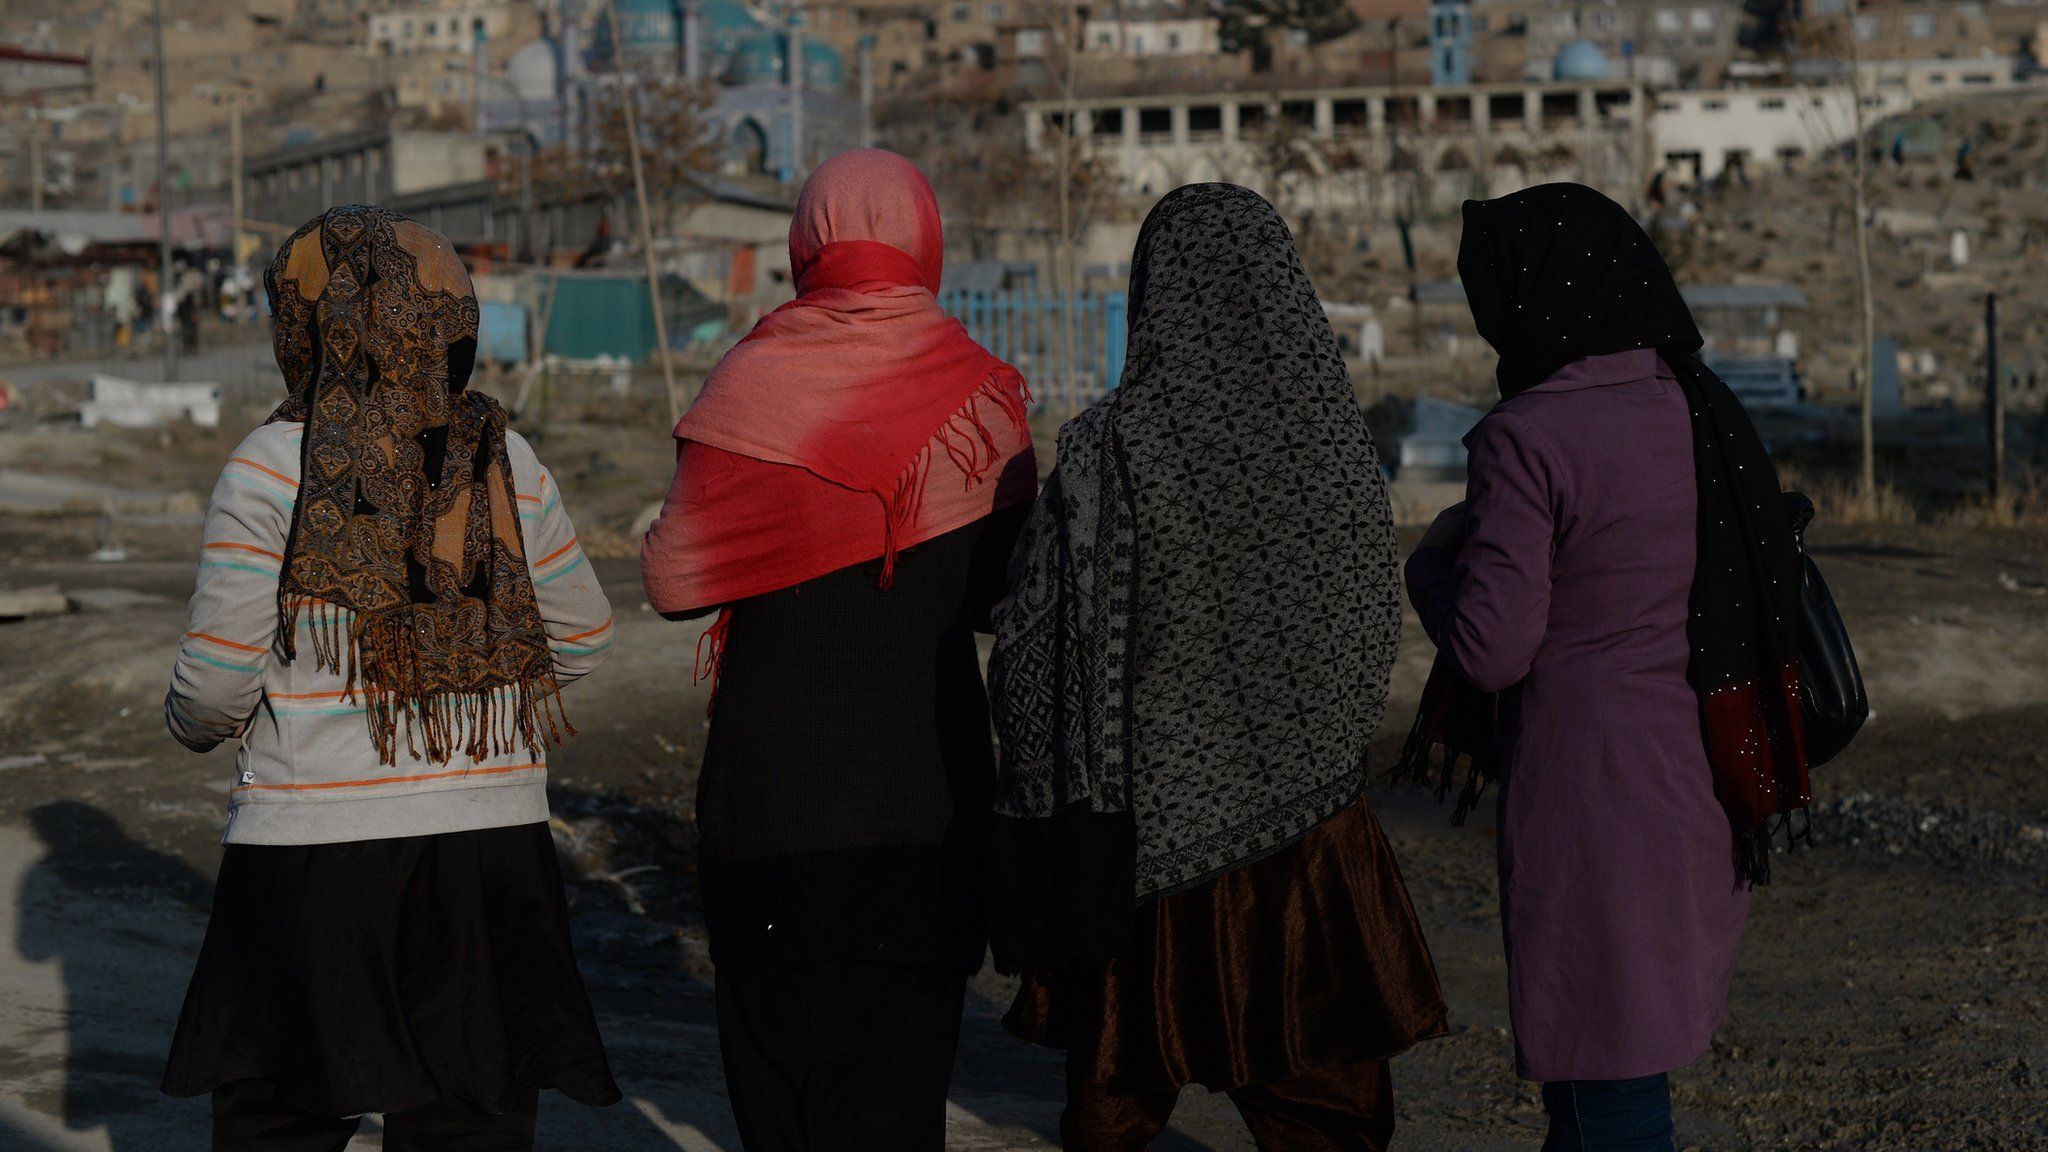 Afghan pedestrians make their way along a street in downtown Kabul on January 14, 2014